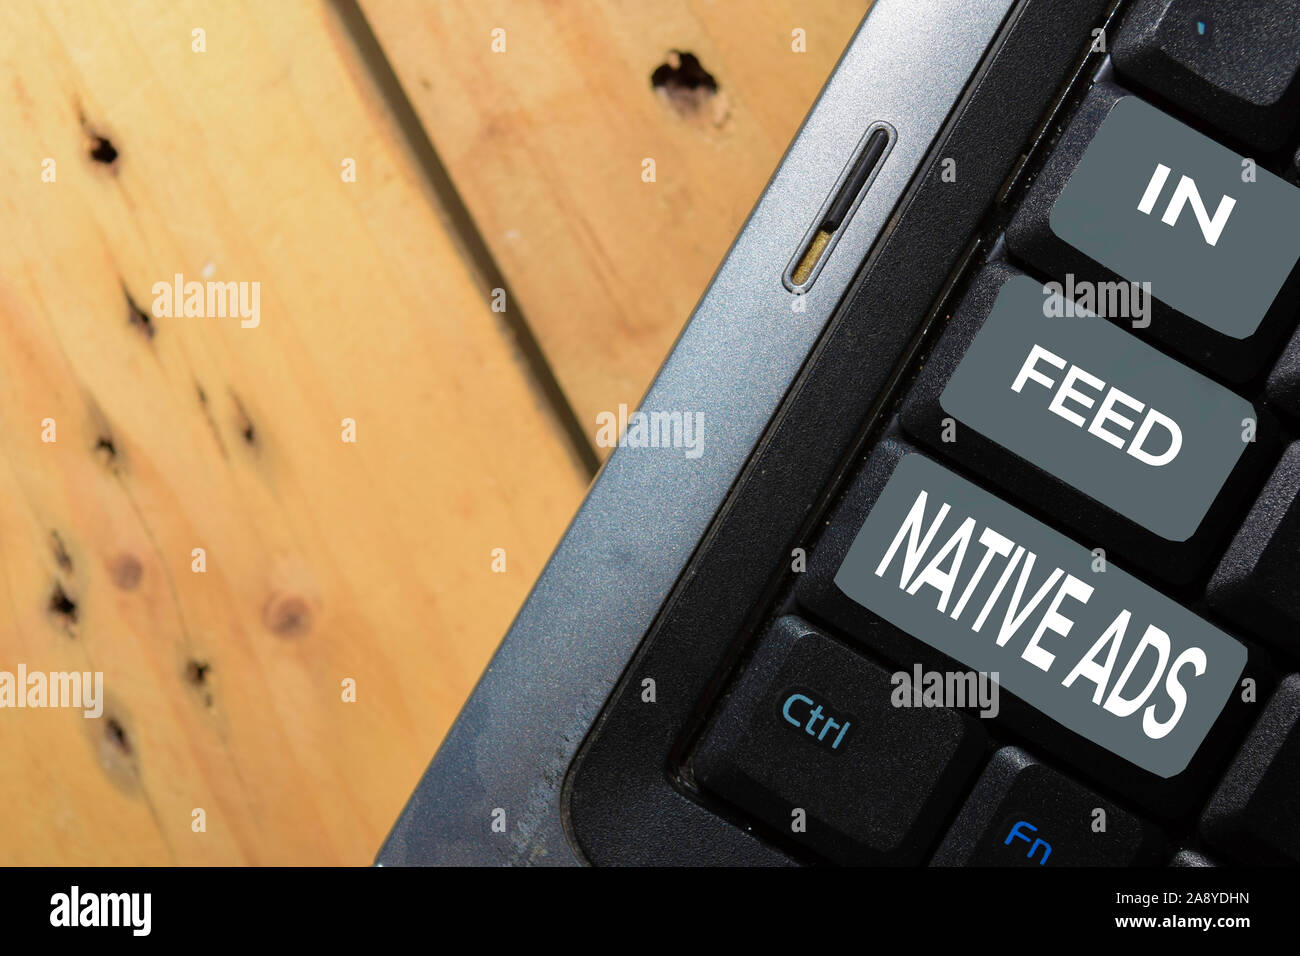 In-Feed Native Ads write on keyboard isolated on laptop background Stock Photo